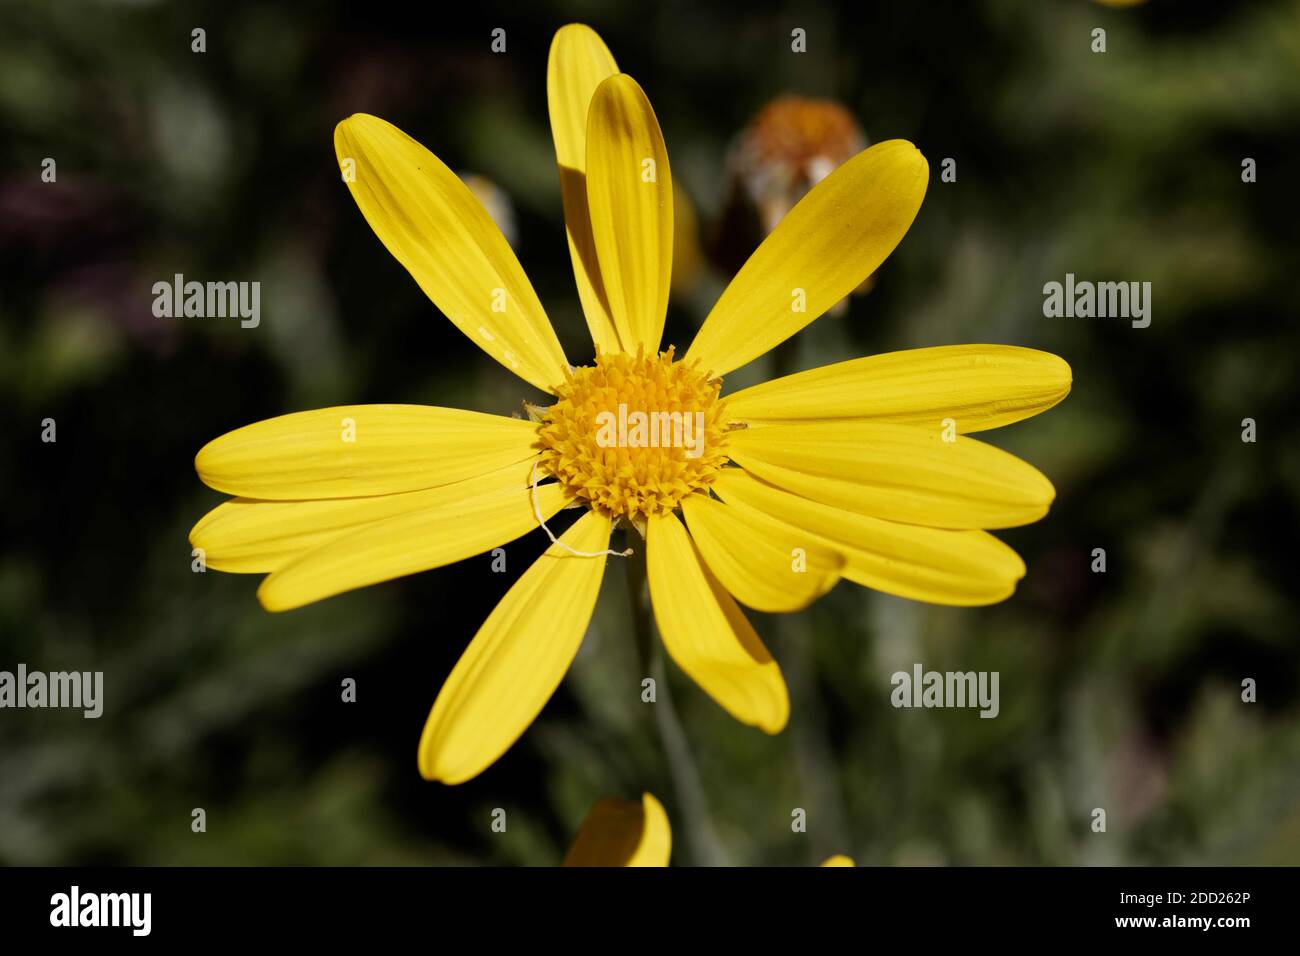 Euryops pectinatus, the grey-leaved euryops, is a species of flowering plant in the family Asteraceae. Stock Photo